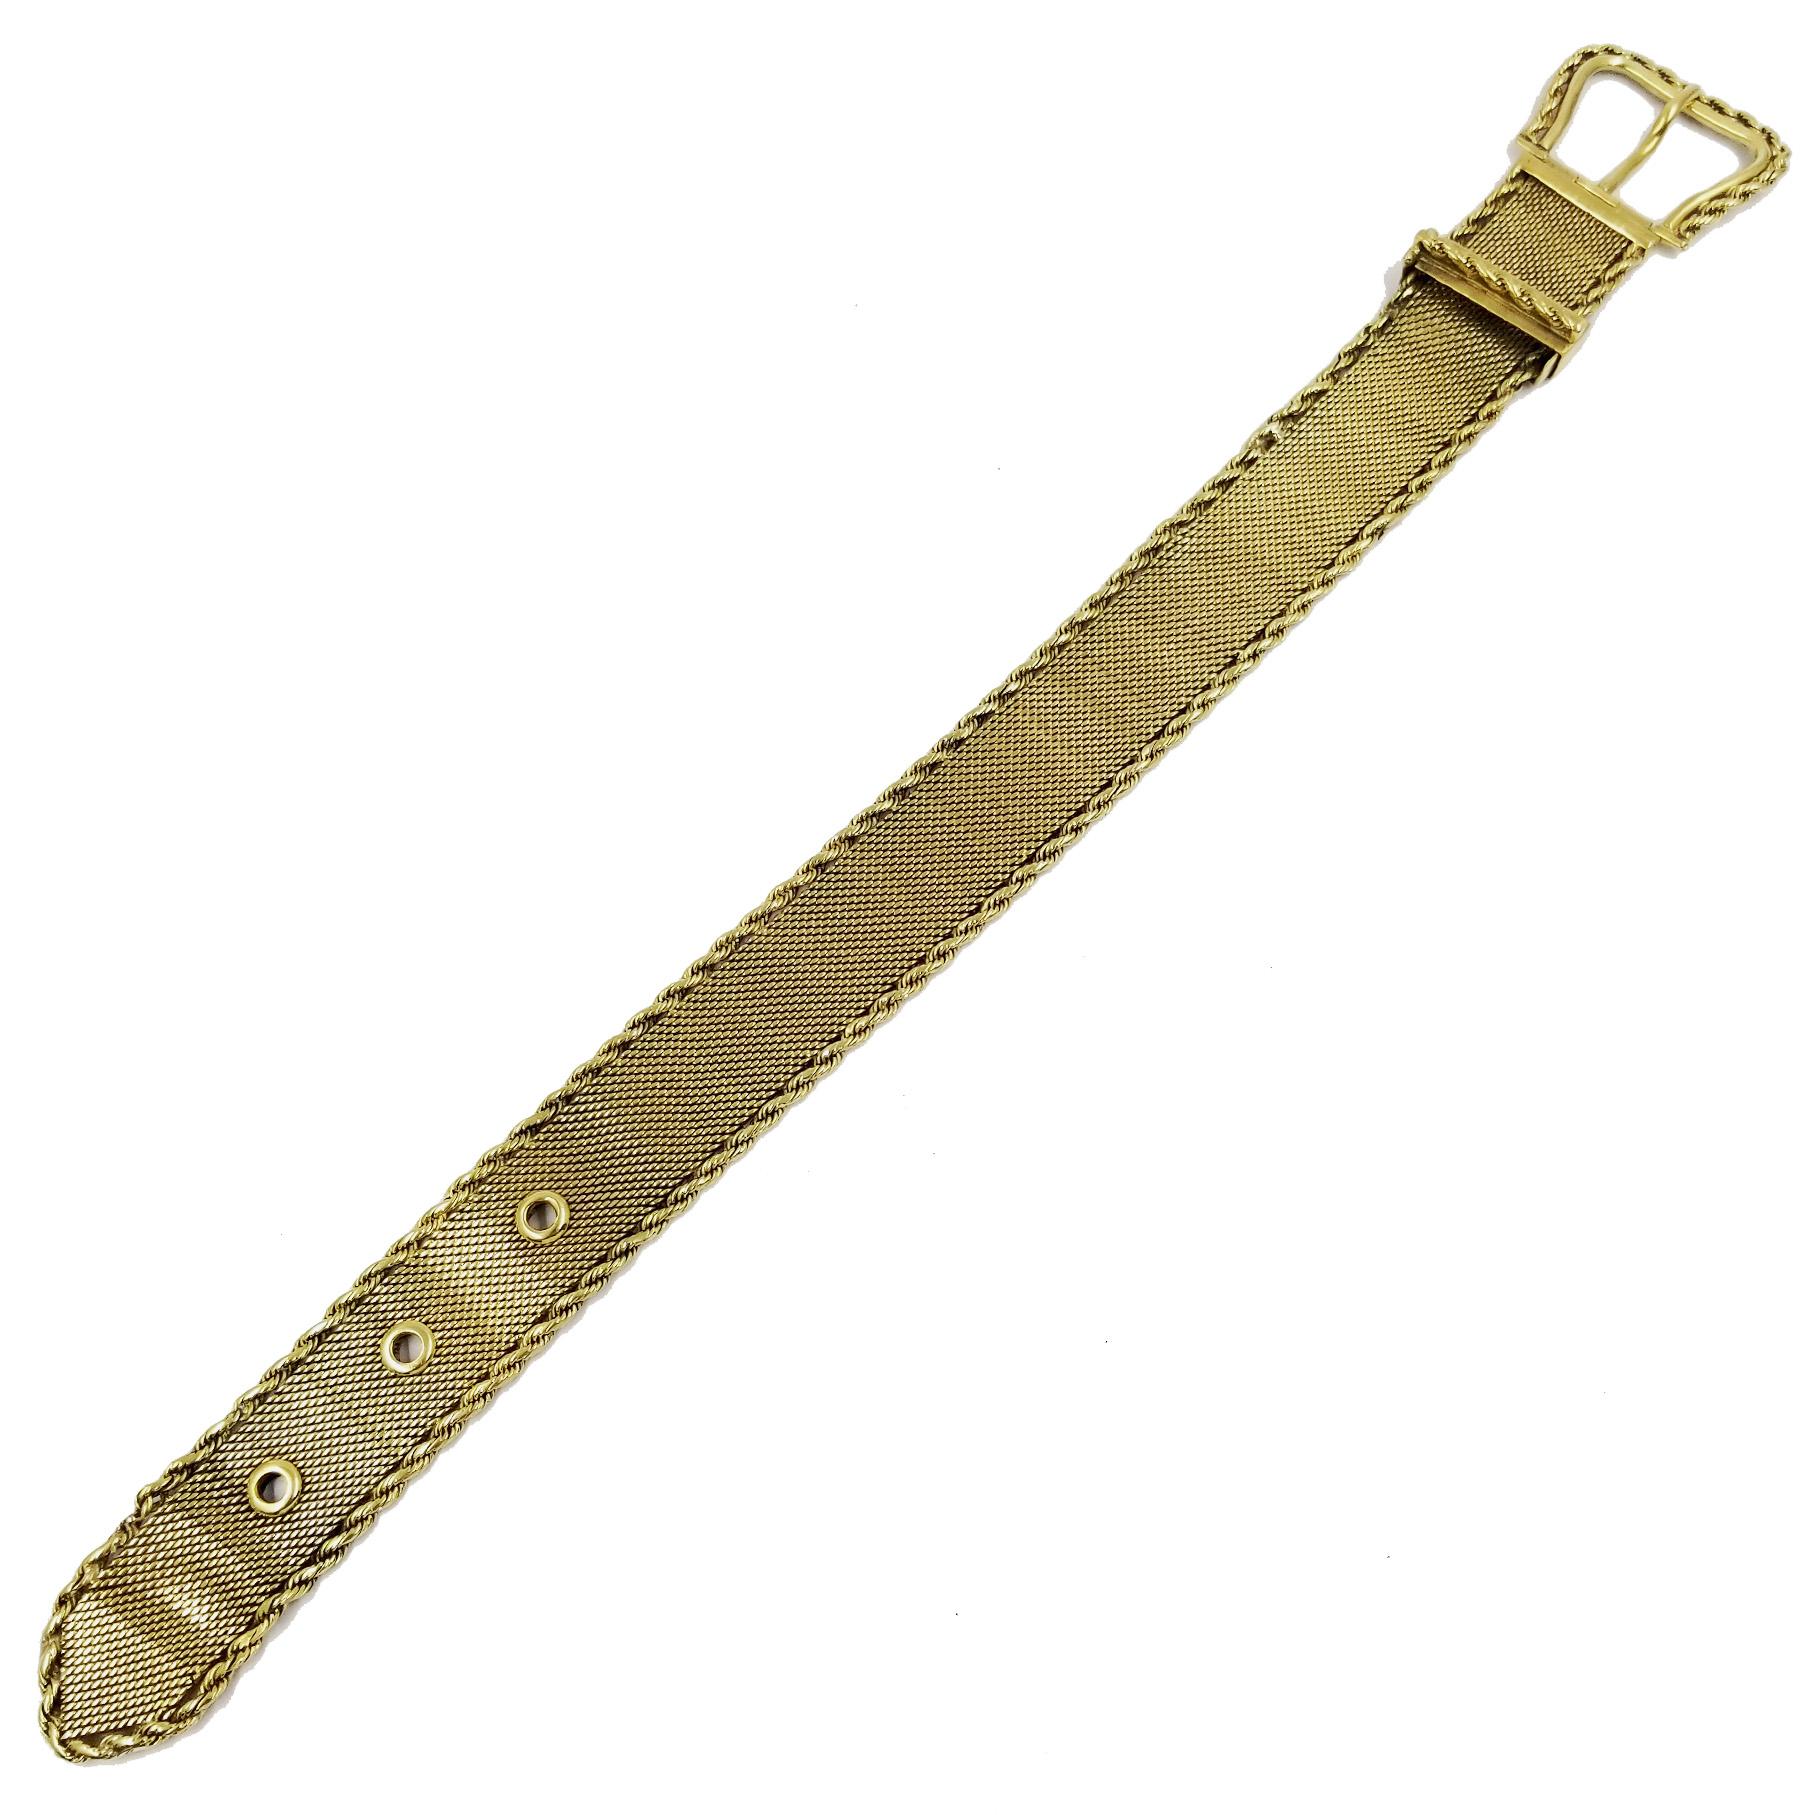 Flexible 18 Karat Yellow Gold Woven Mesh Antique Buckle Bracelet with Rope Accents. Belt Type Closure with Safety Catch. Adjustable Length Fits 7.25 inch to 8.5 inch wrist. Total length is 9.75 inches. Measures approximately 0.75 inches wide.